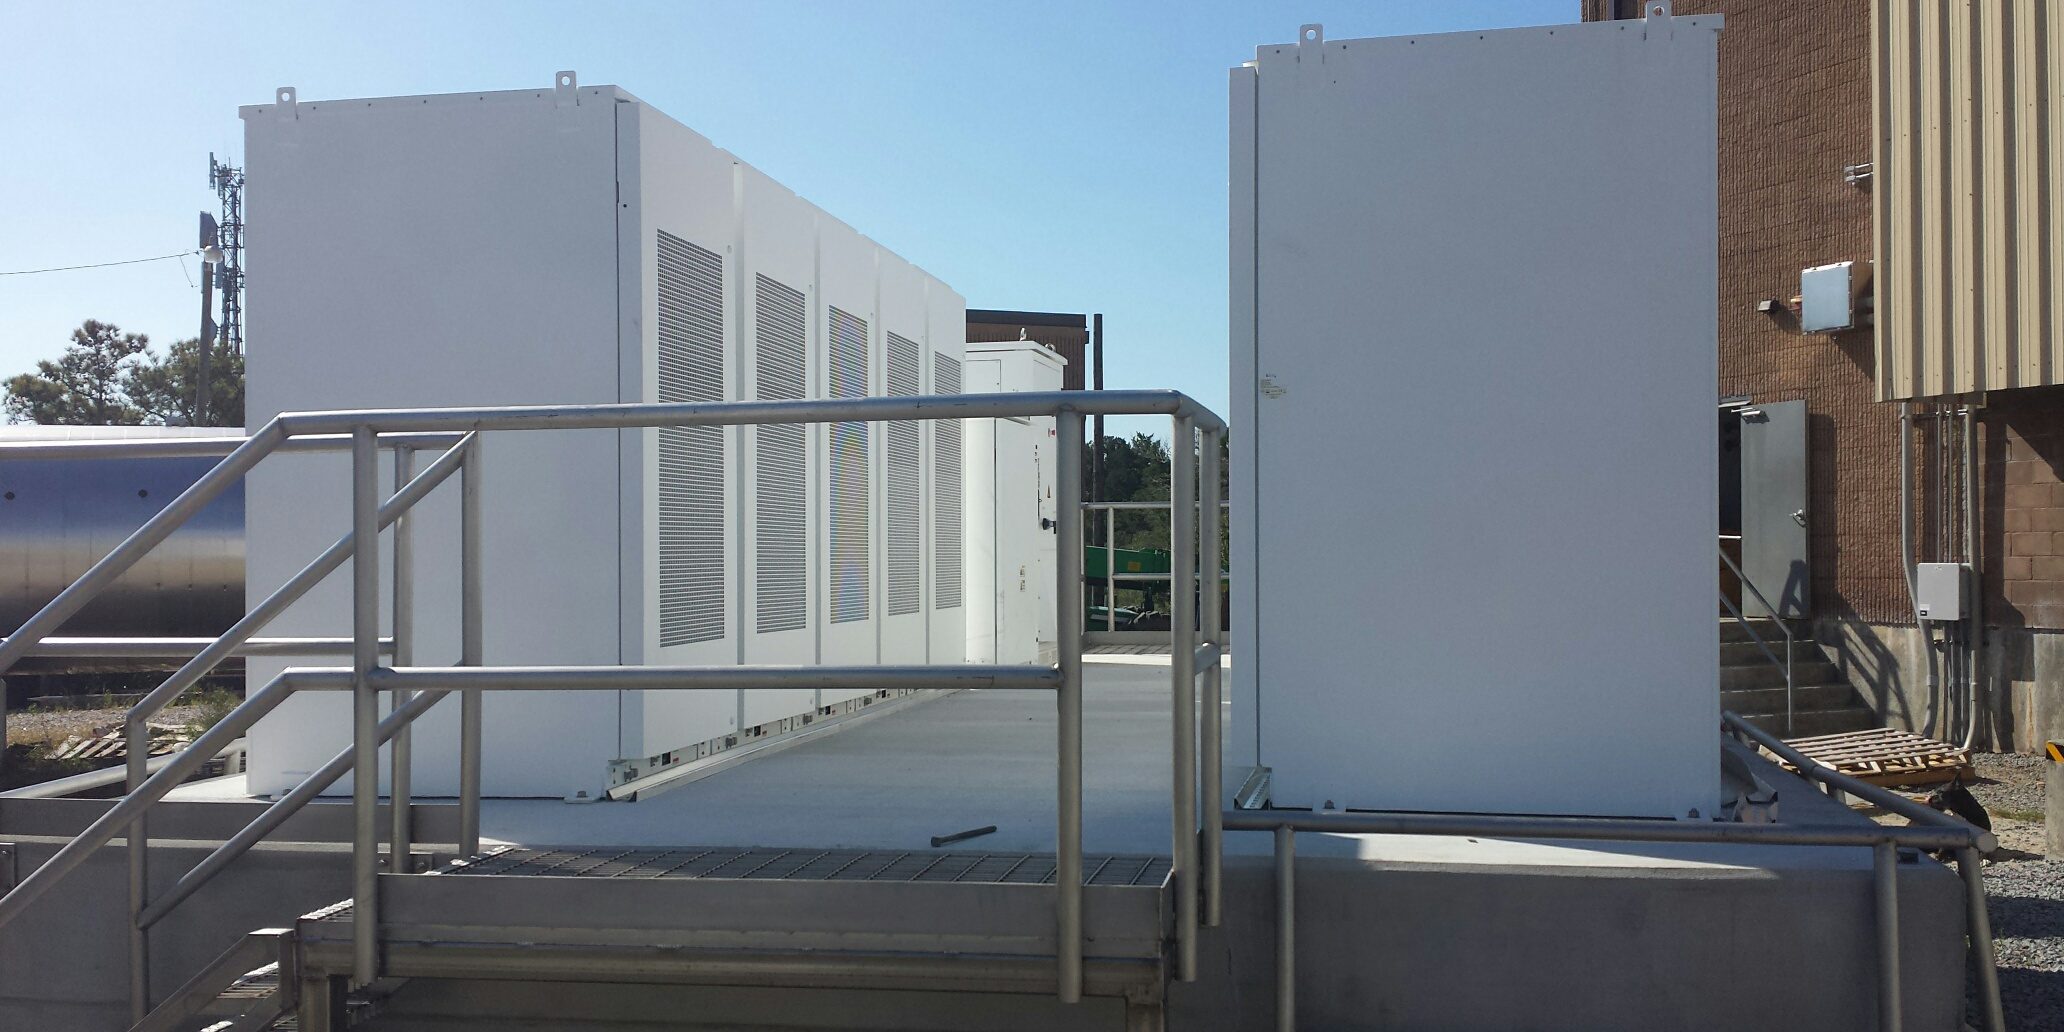 Tesla completes another microgrid project with Powerpacks - powering an